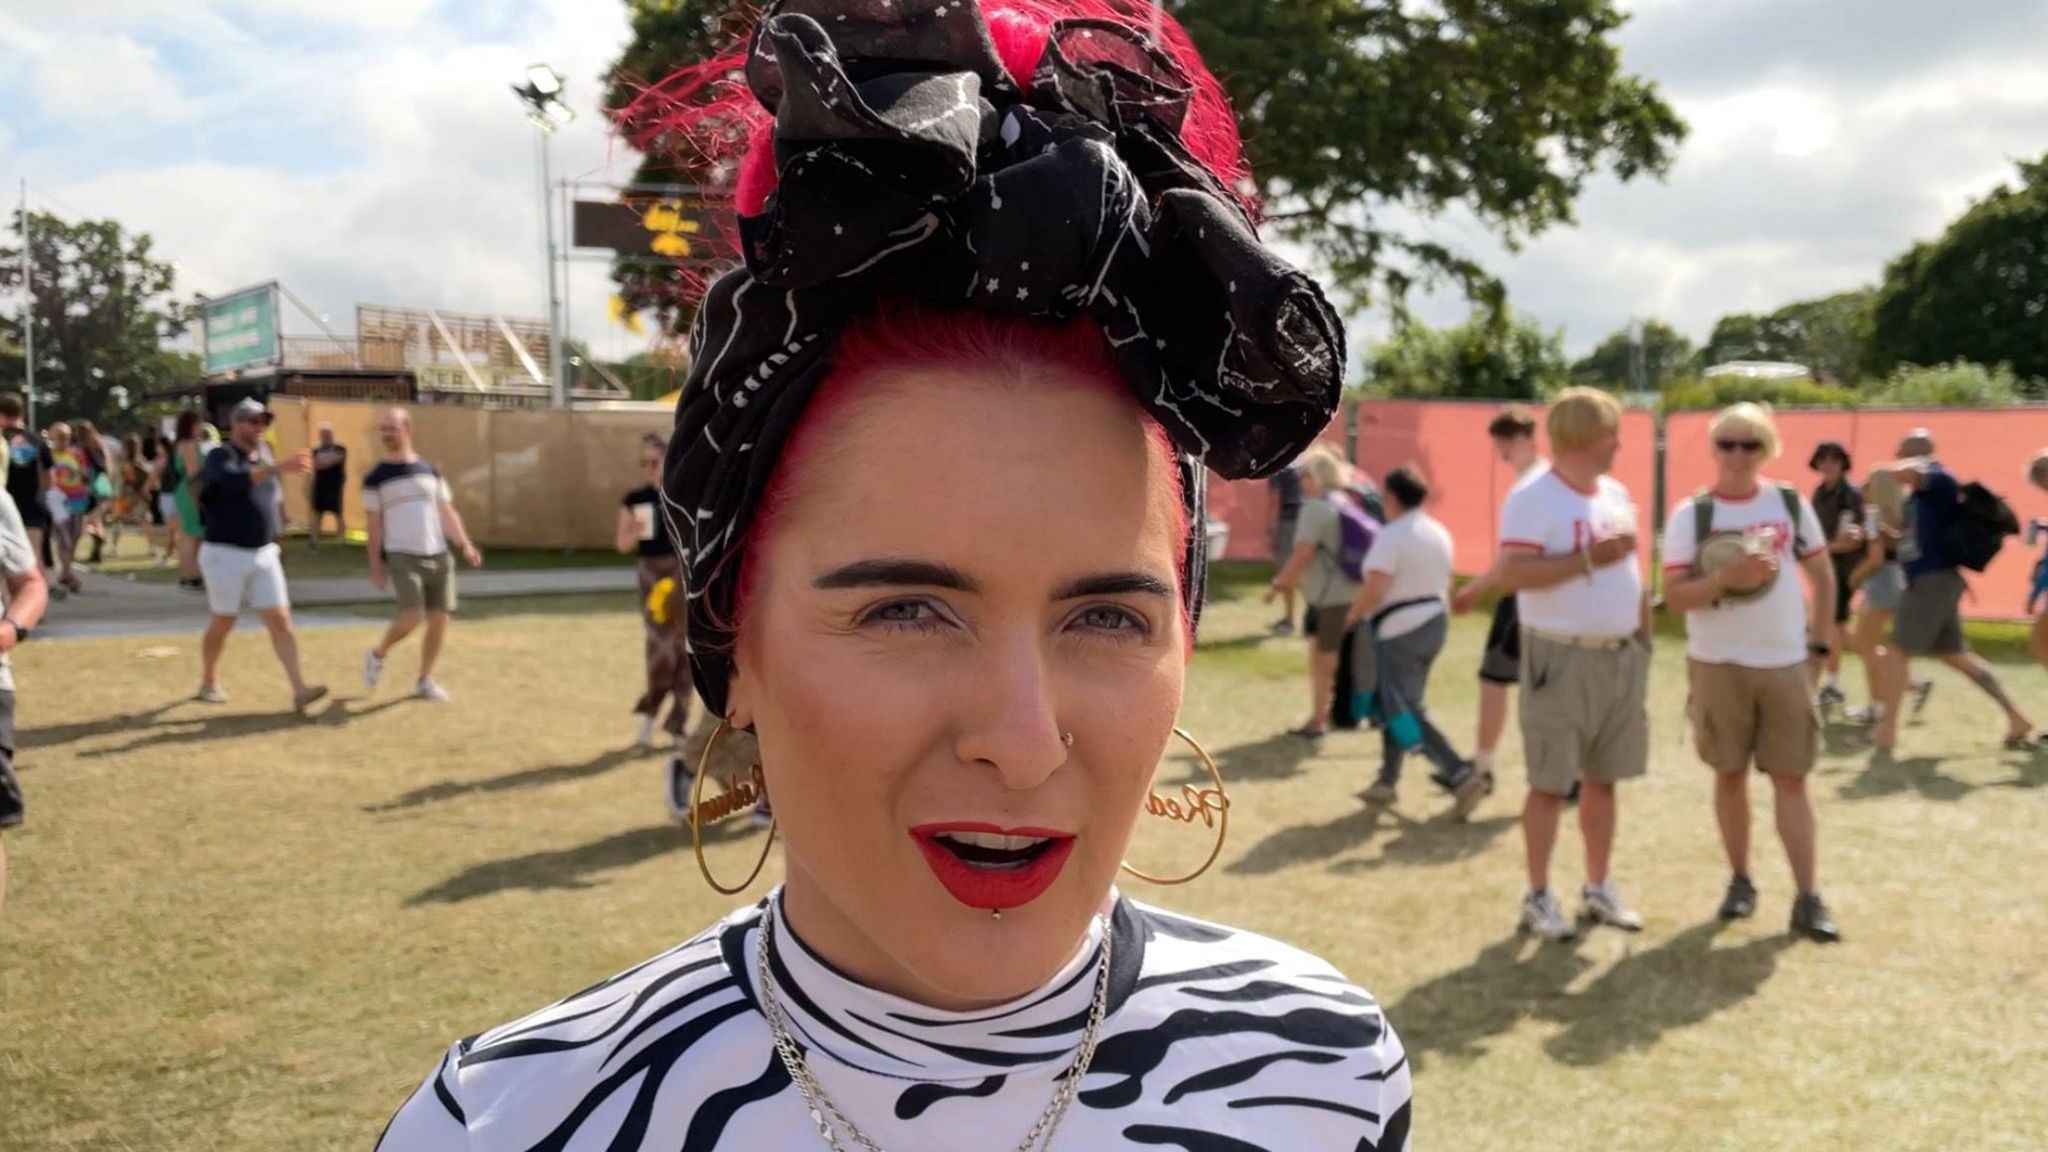 Hatice Tuzun, an artist who creates political music, with pink hair and large earnings at the Isle of Wight Festival at the 